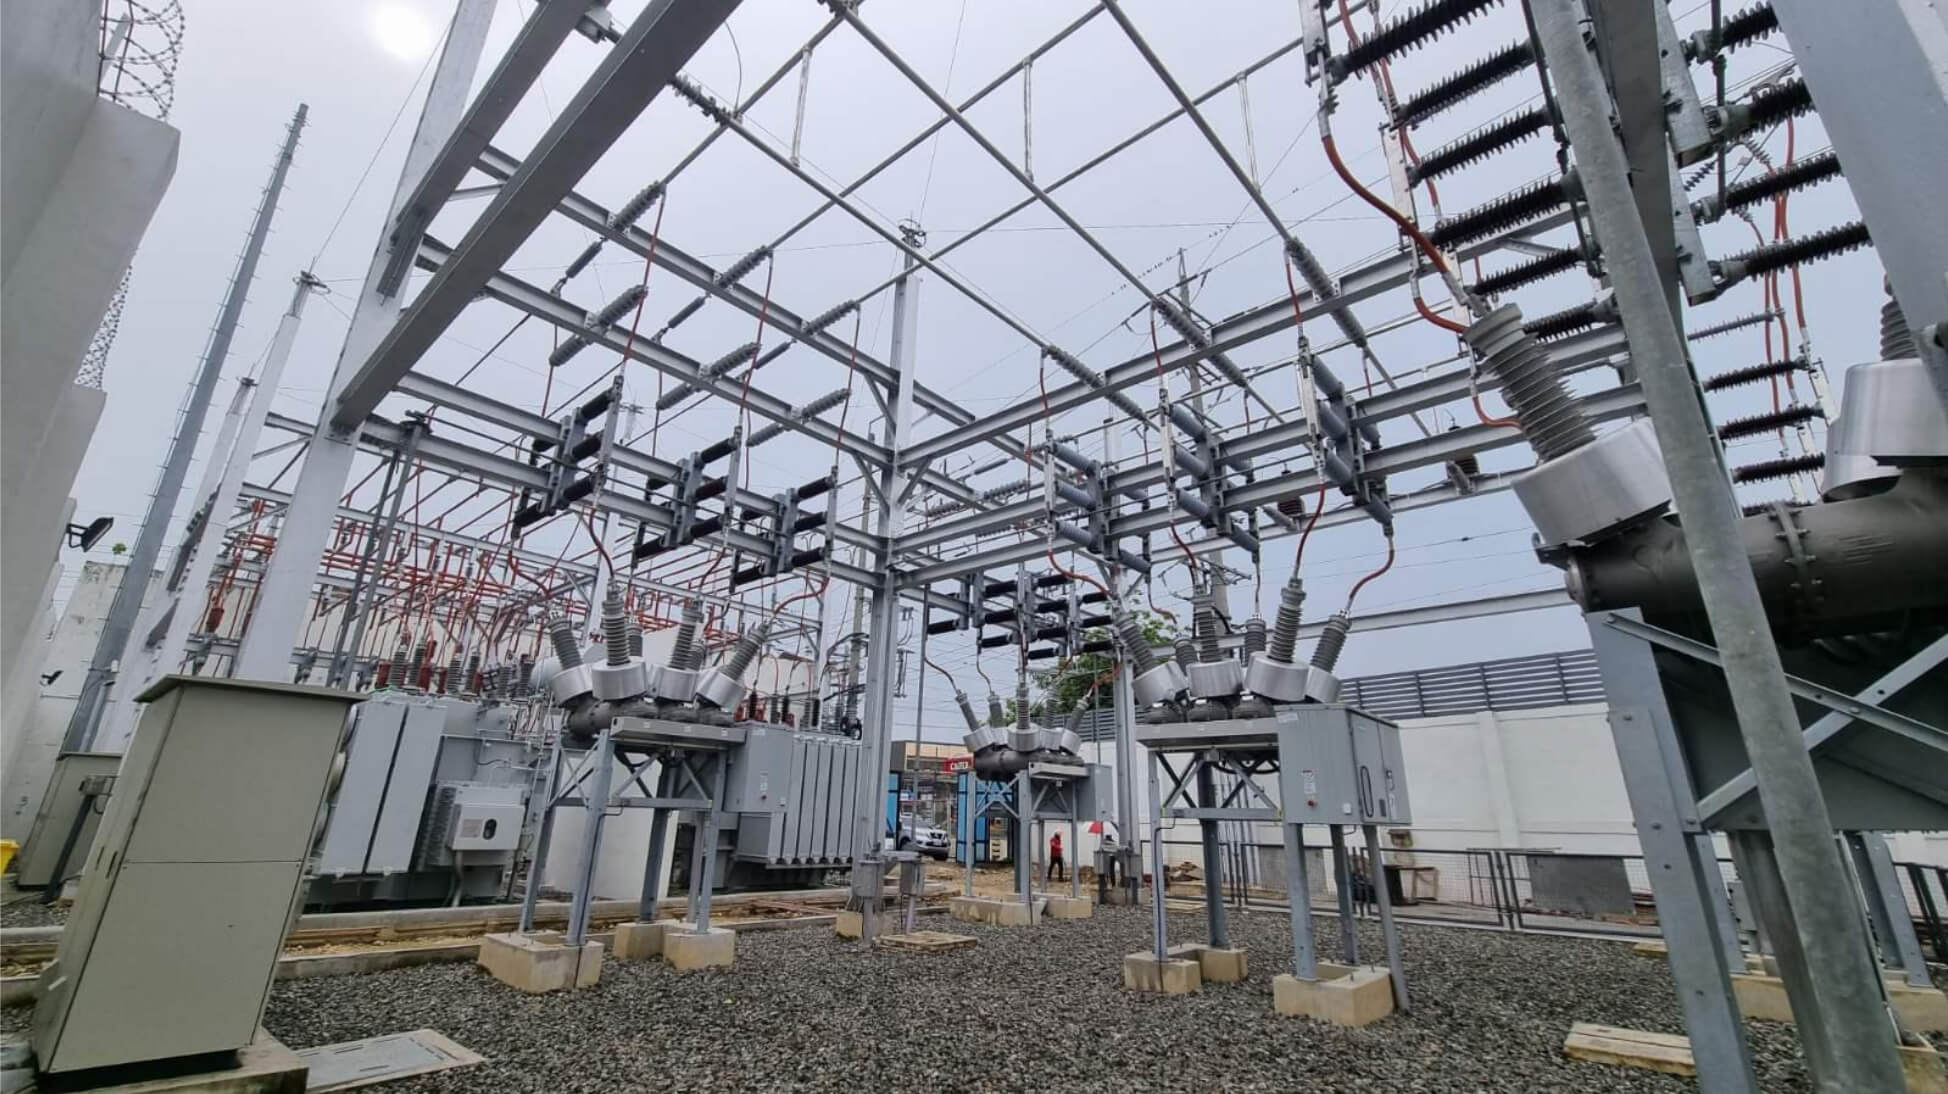 FULLY DIGITAL SUBSTATION. The Visayan Electric Pakna-an substation is the first fully digital substation within its franchise area. Visayan Electric spent P102 million for the project, of which P29 million went into the protection and control systems adapting the IEC 61850, an international transmission protocol standard for communication in medium- and high-voltage electric substations.